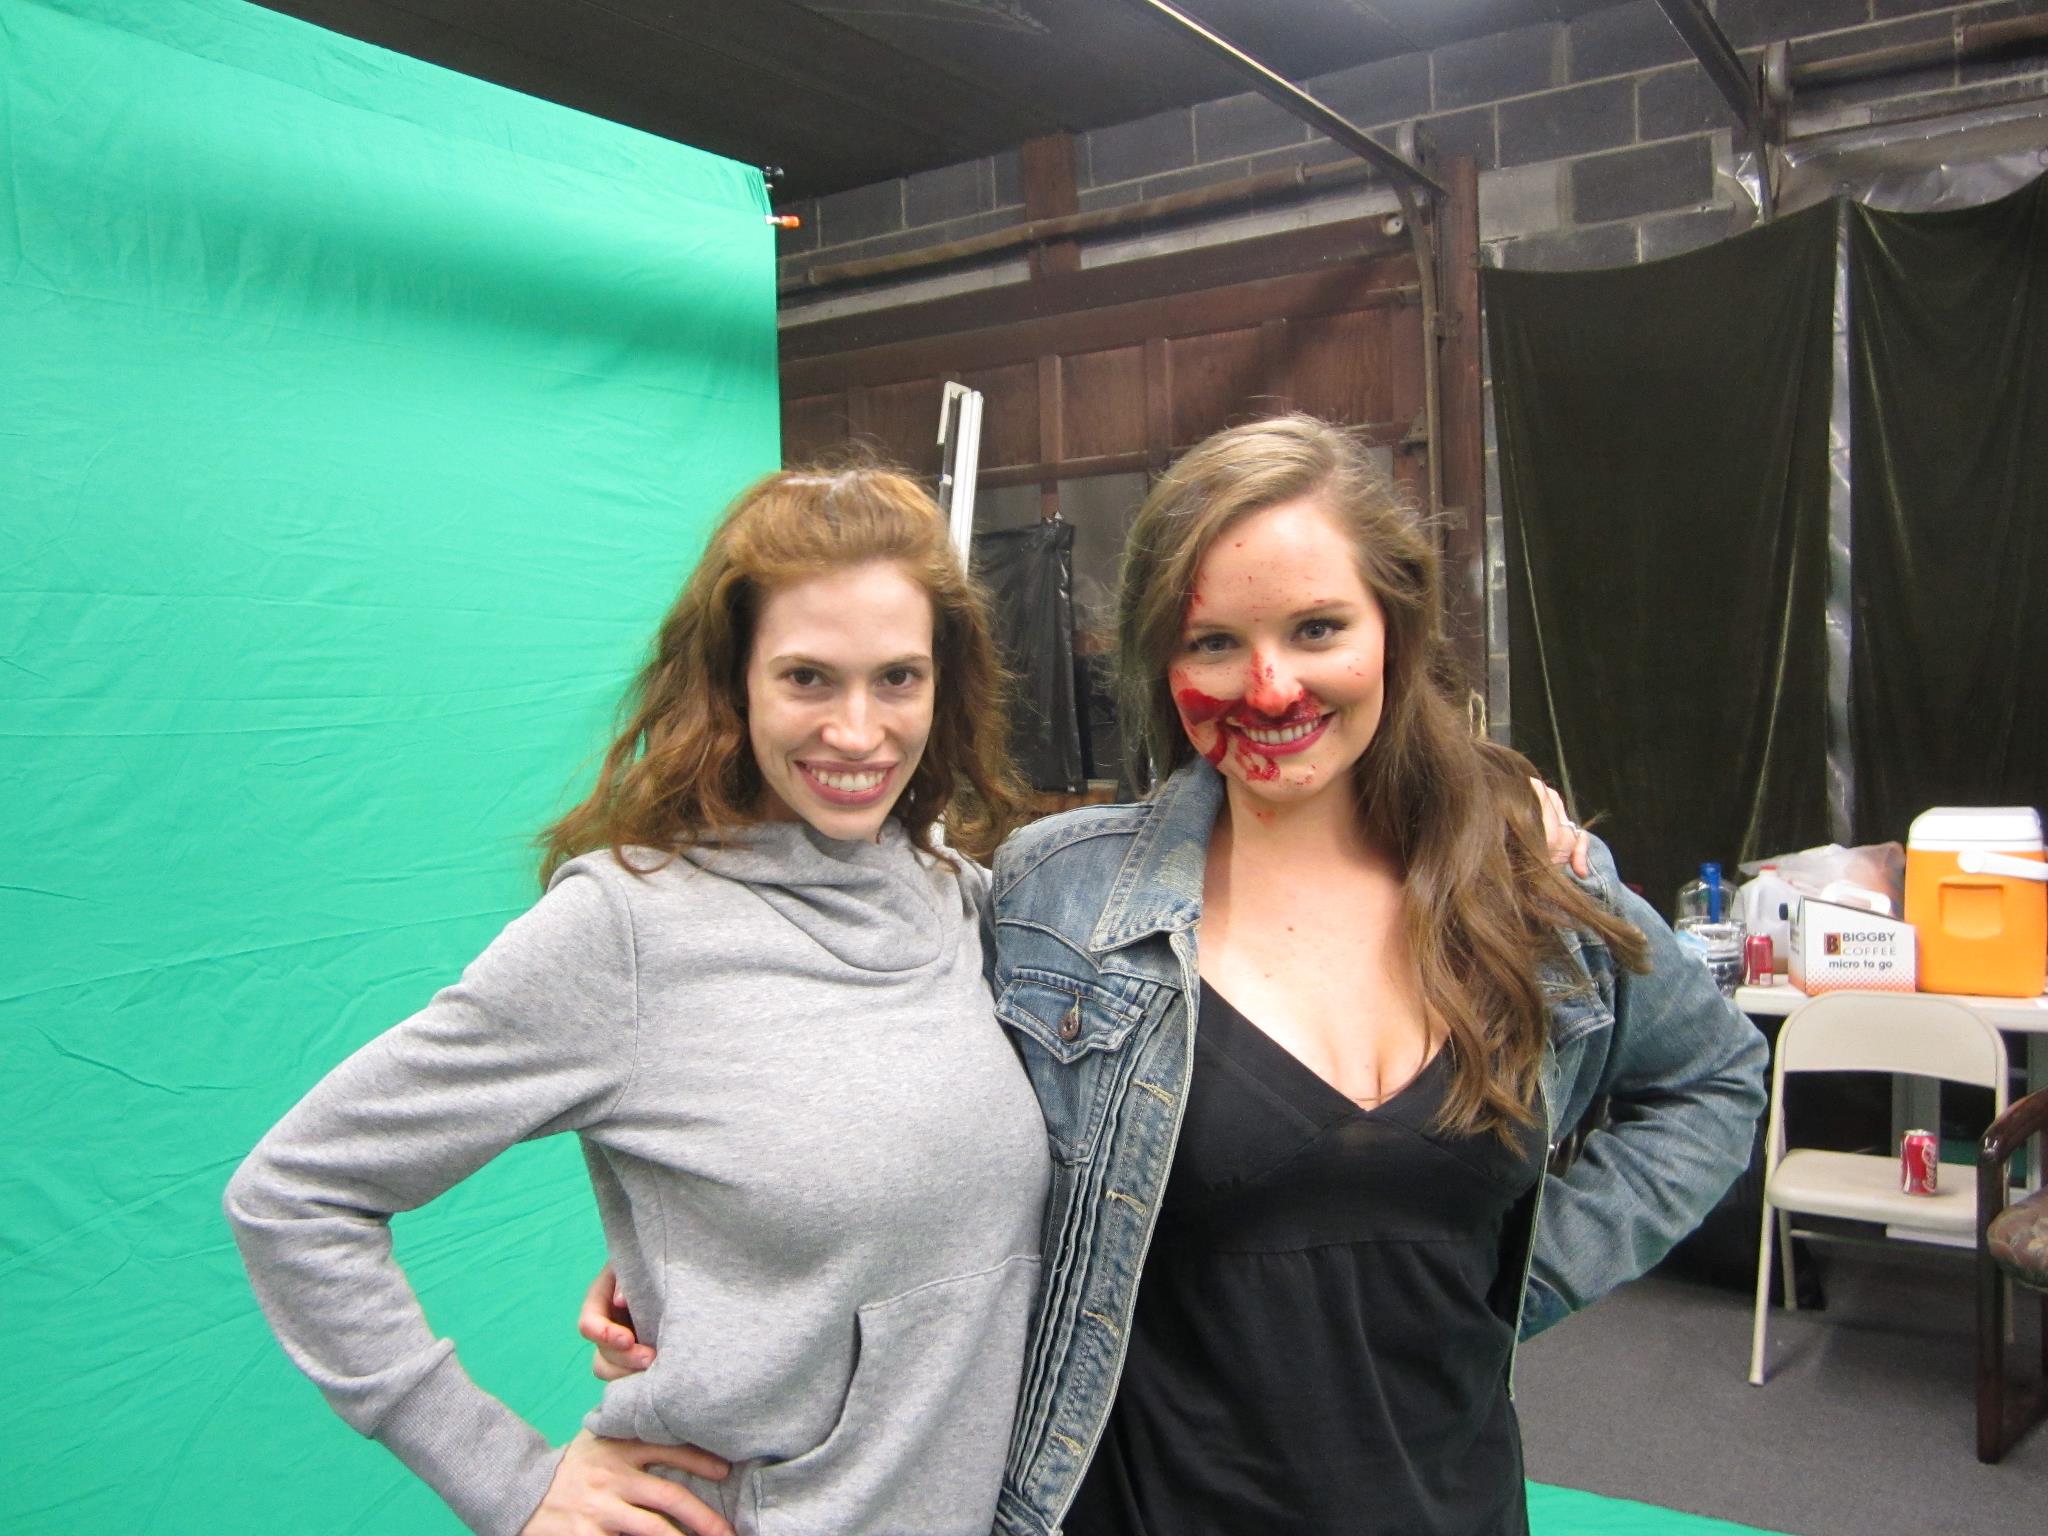 On set for TICKET TO THE CIRCUS, 2011. Makeup by Andrea Syron Passera.